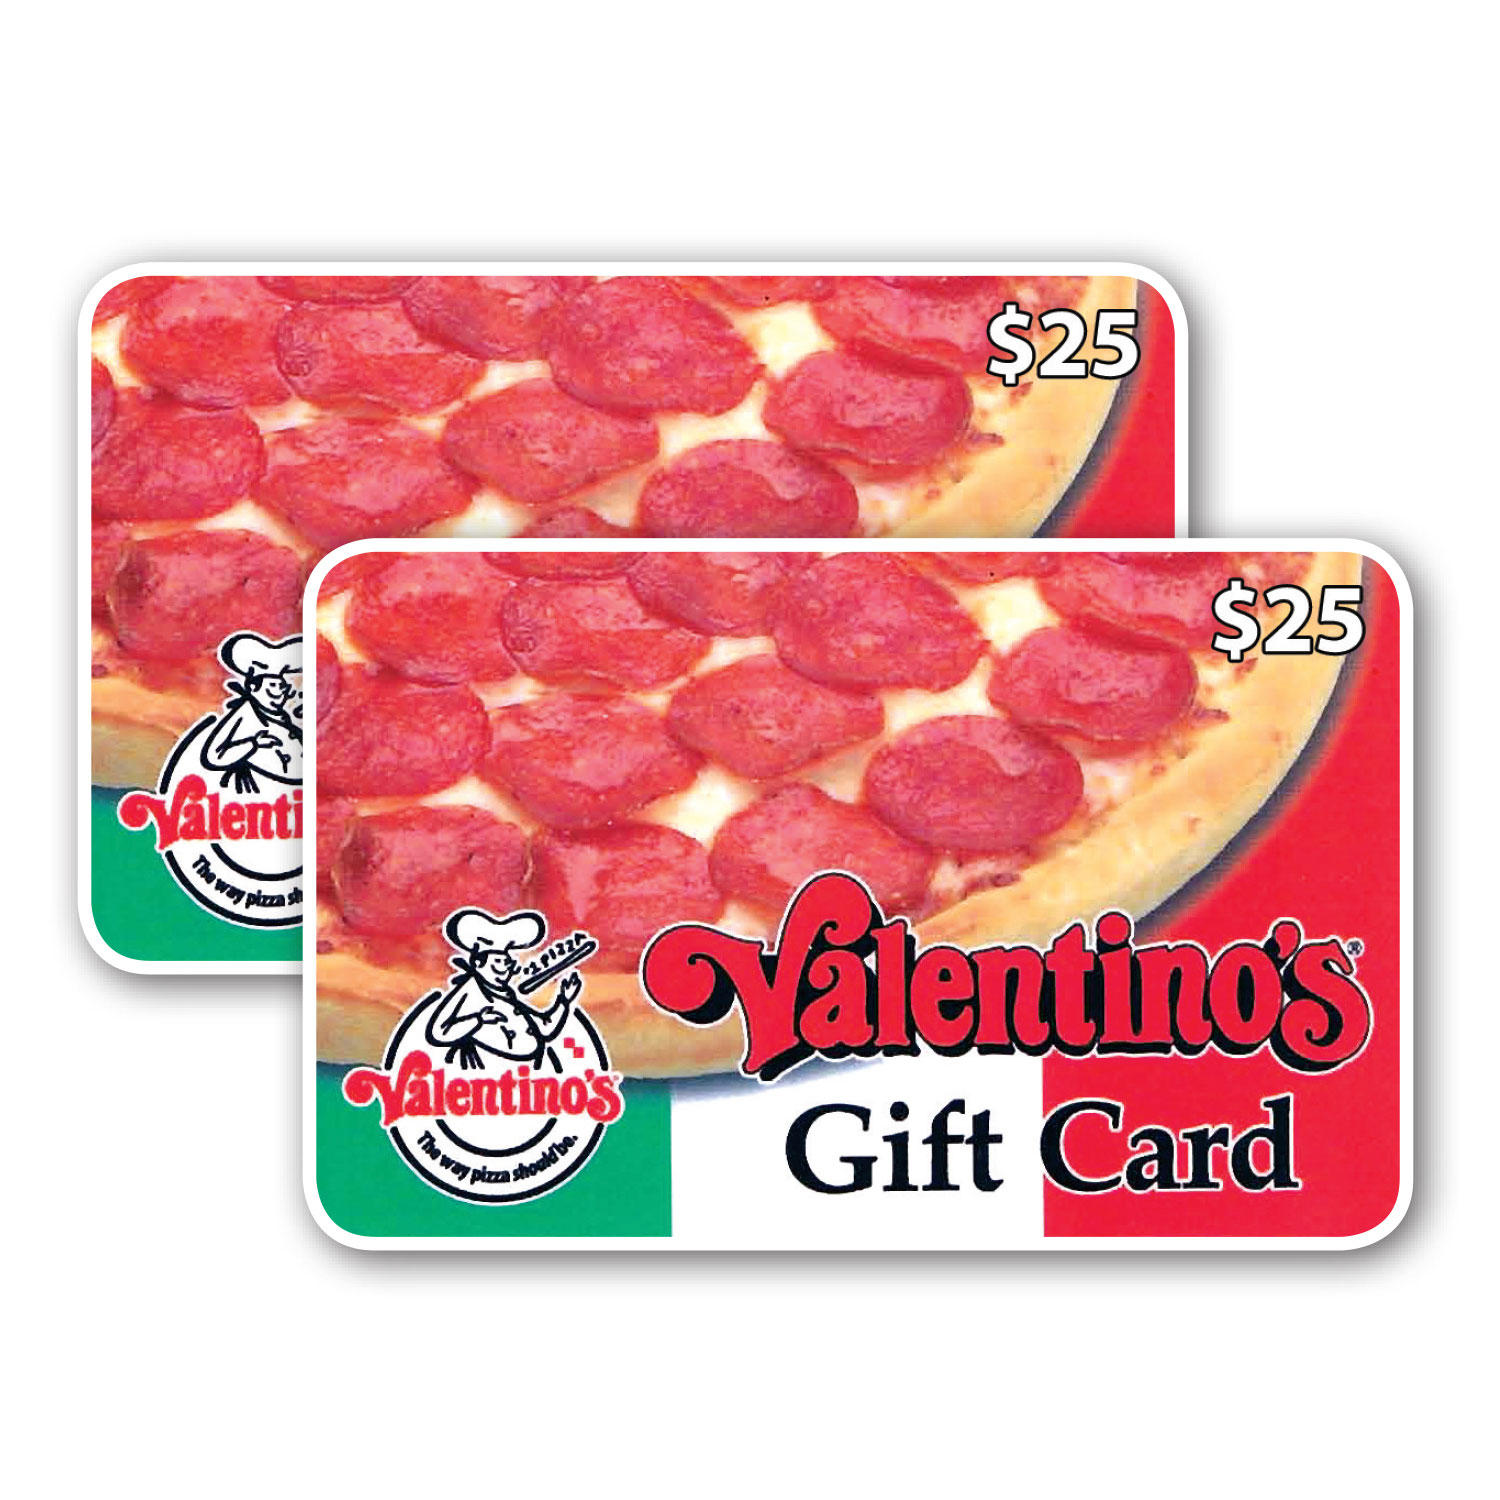 Valentino's Gift Cards - 2 X $25